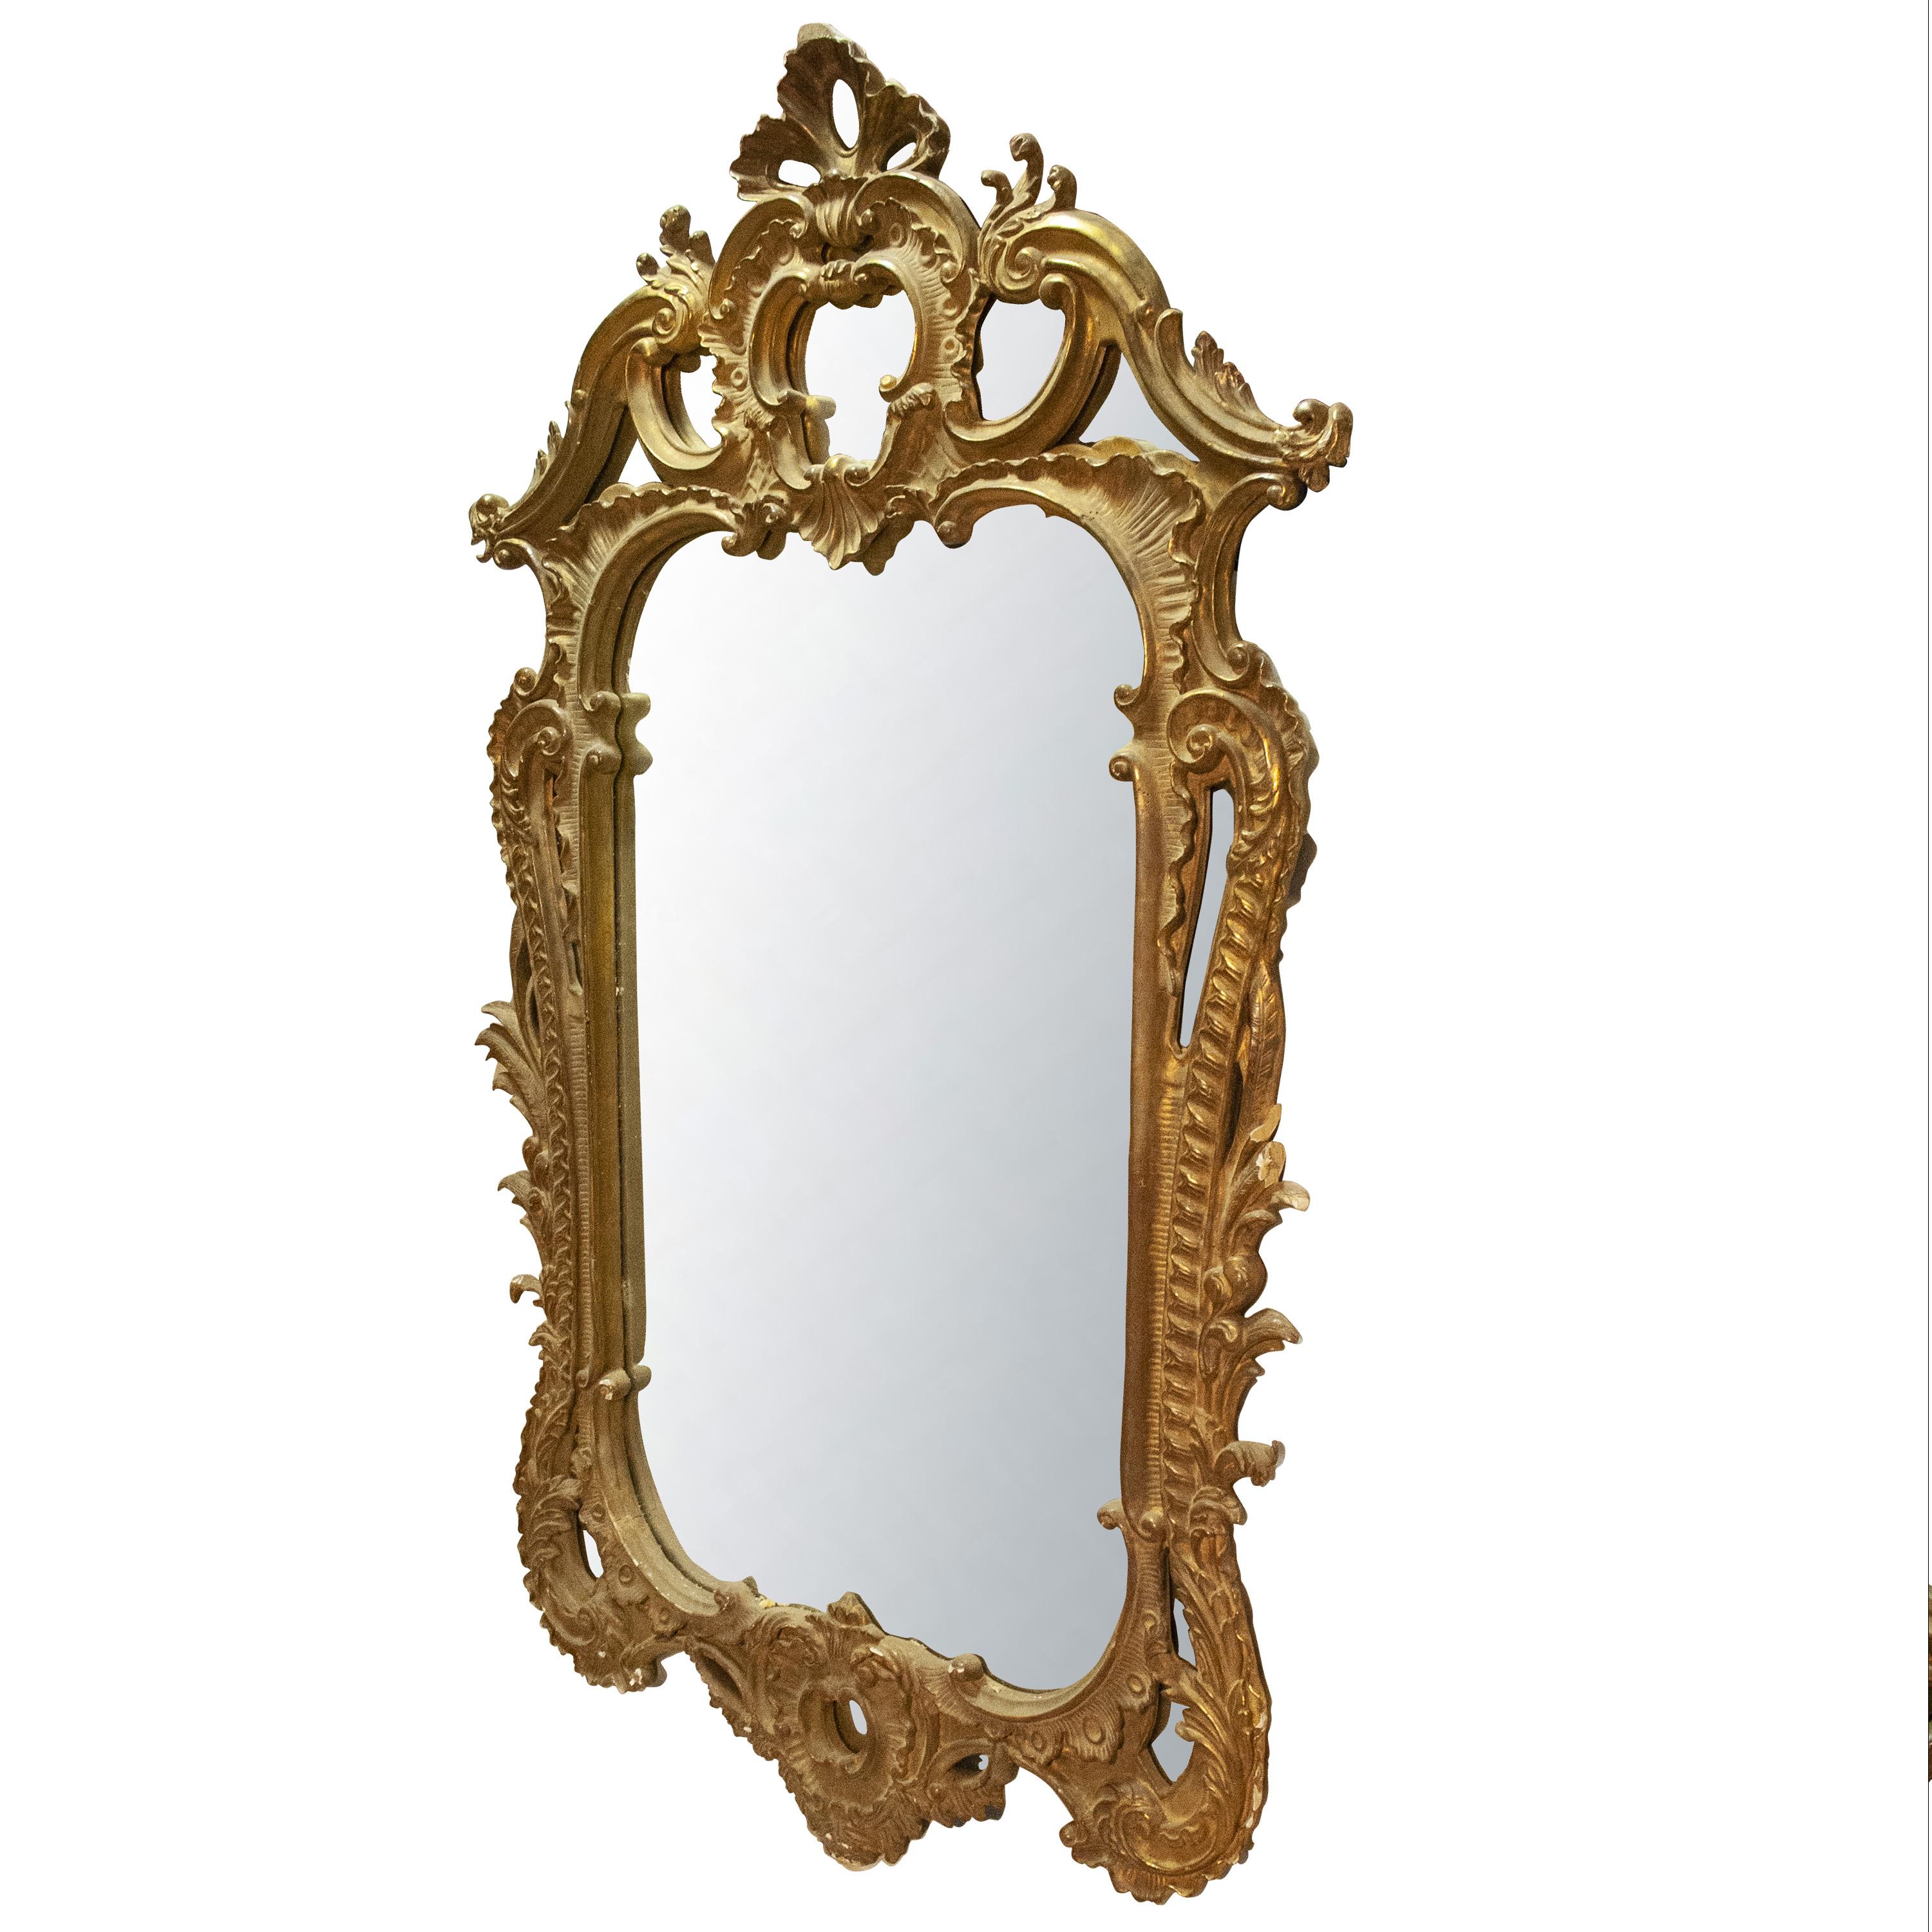 Neoclassical Regency Rectangular Handcrafted Gold Foil Wood Mirror Spain, 1970 For Sale